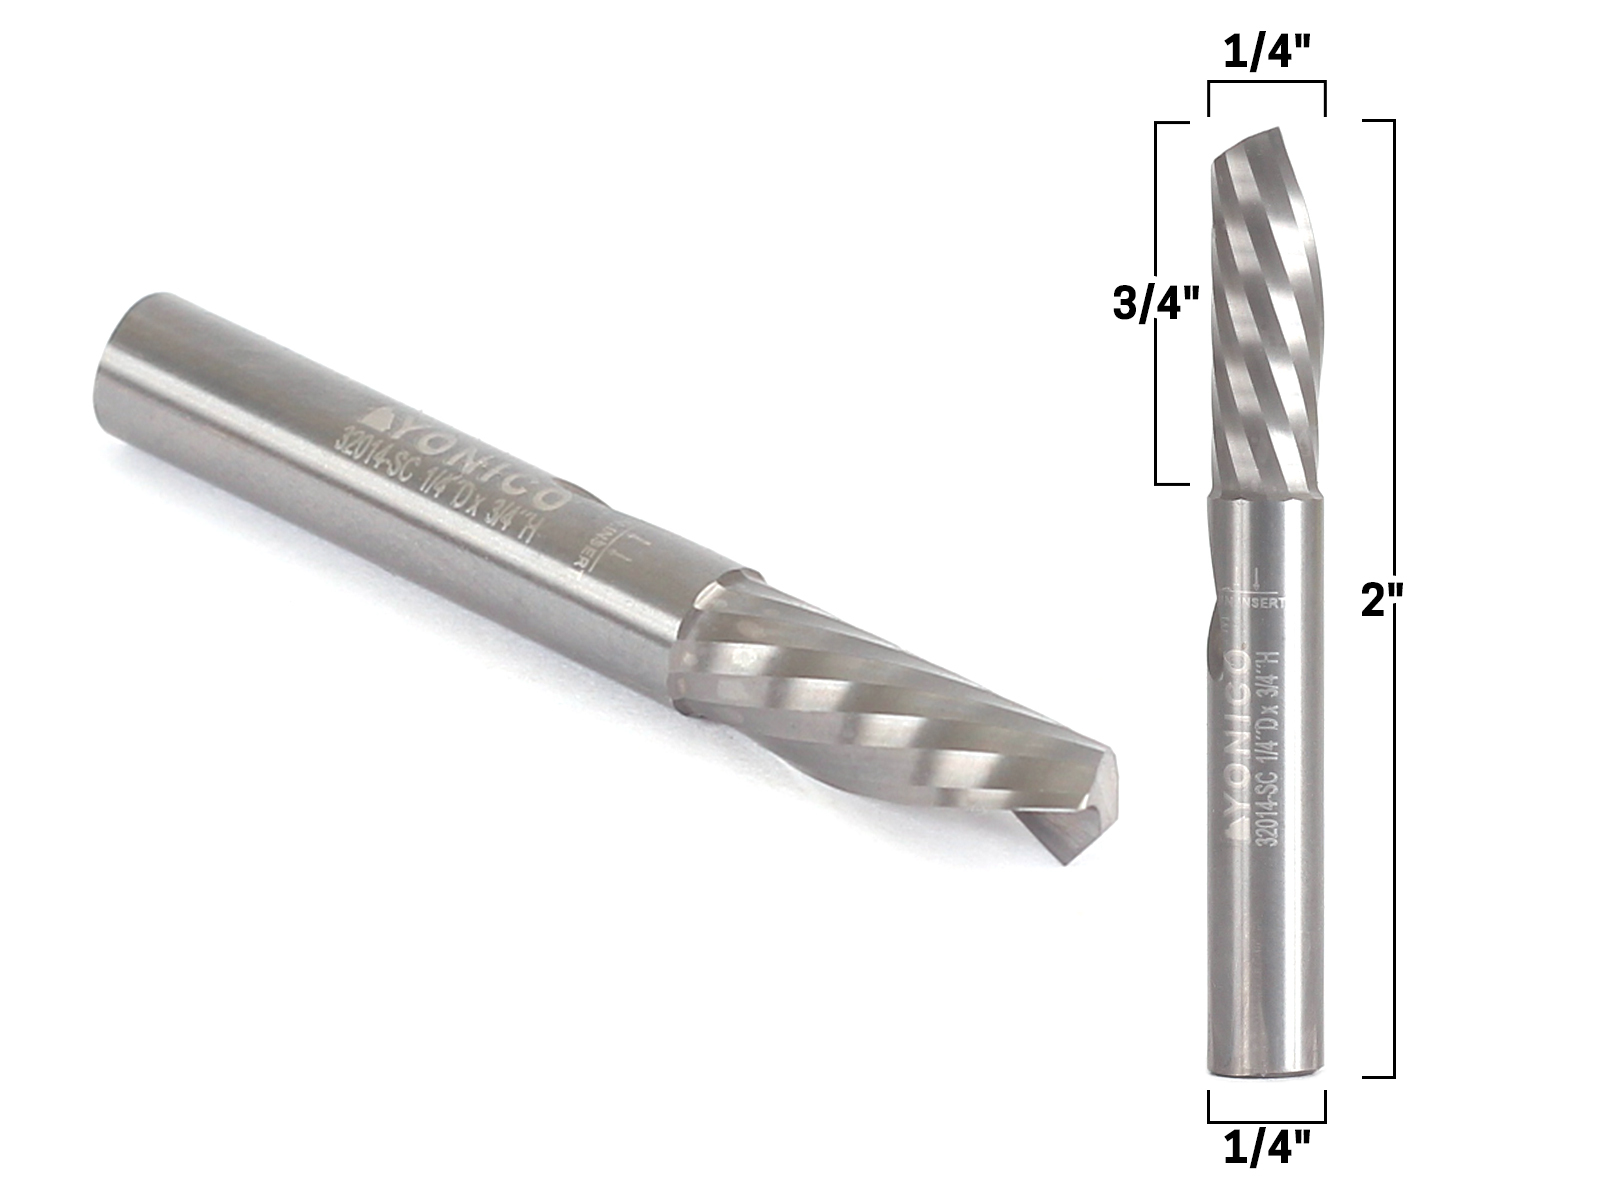 1 Flute 21 Degree Helix 3.0000 Overall Length Uncoated Finish Inch 0.2500 Shank Diameter LMT Onsrud 62-776 Solid Carbide Downcut Spiral O Flute Cutting Tool 0.2500 Cutting Diameter Bright 